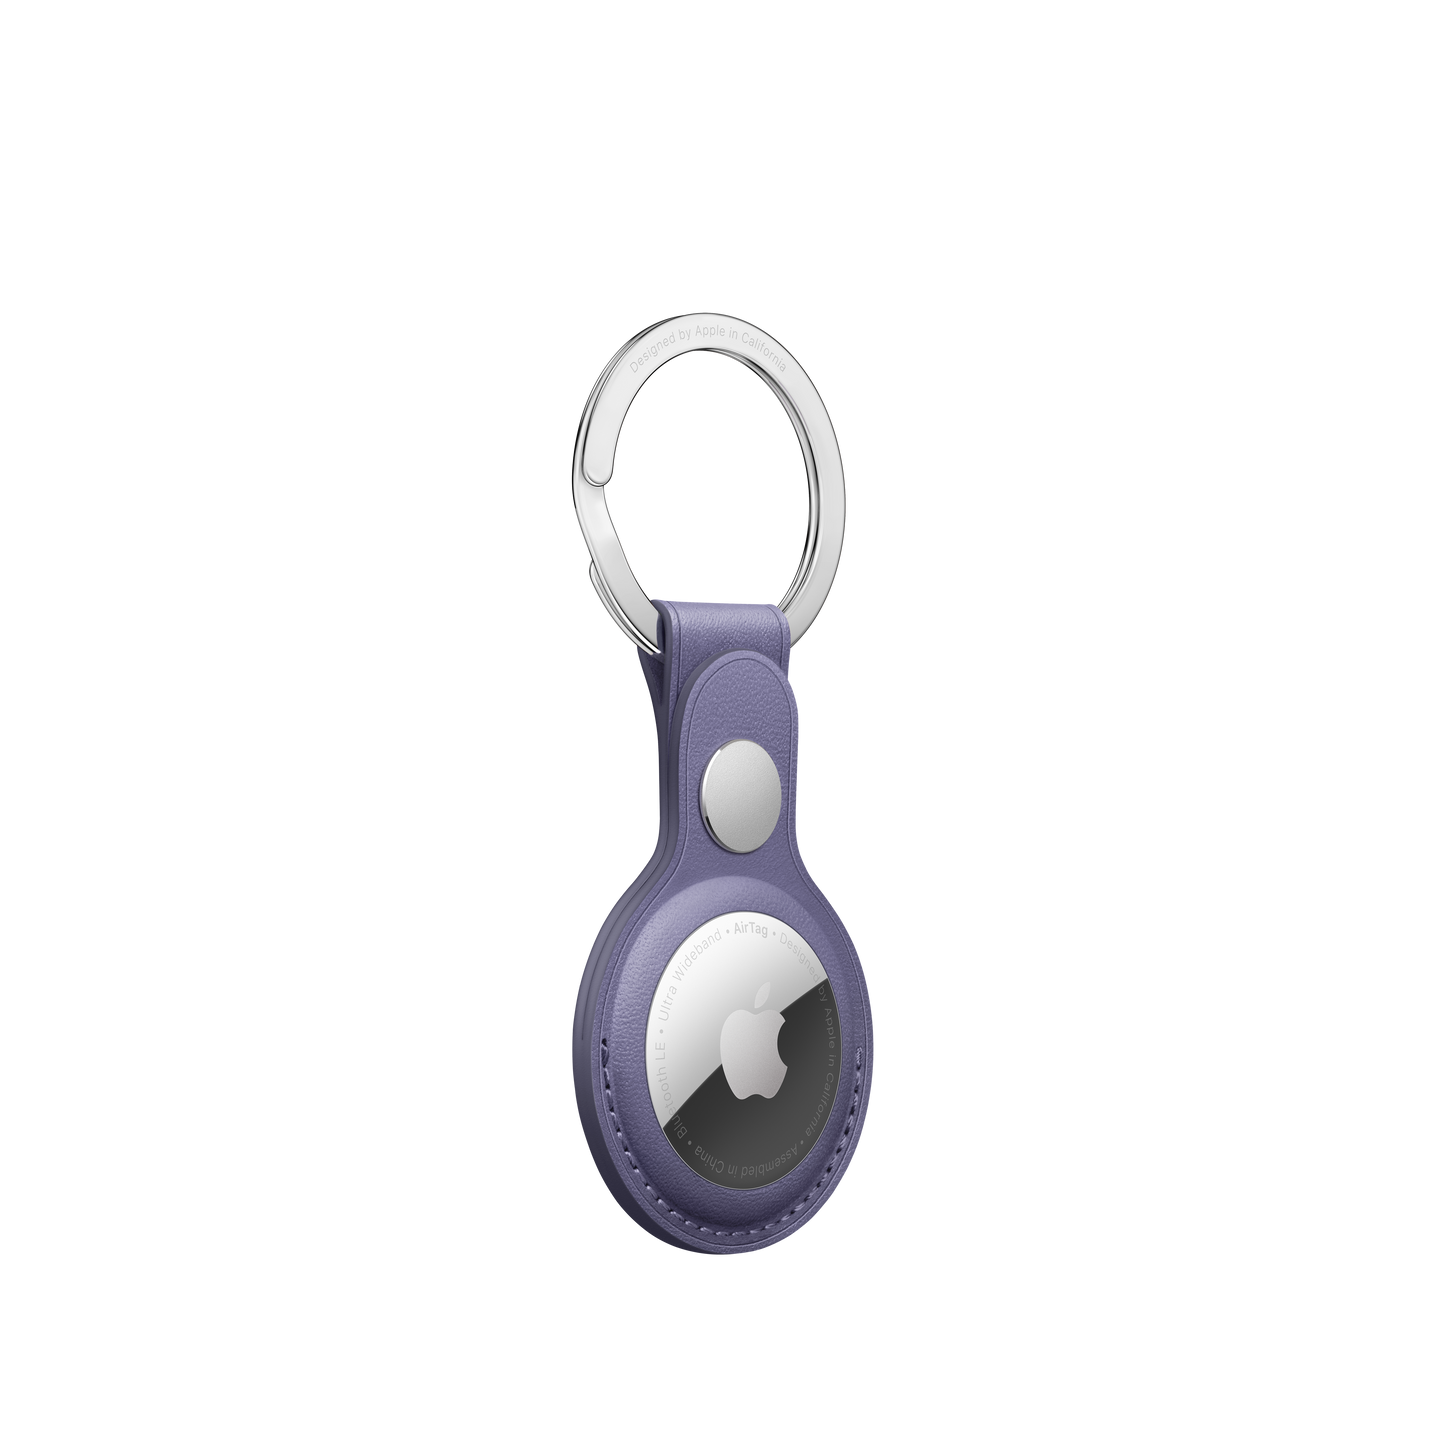 AirTag Leather Key Ring – Wisteria